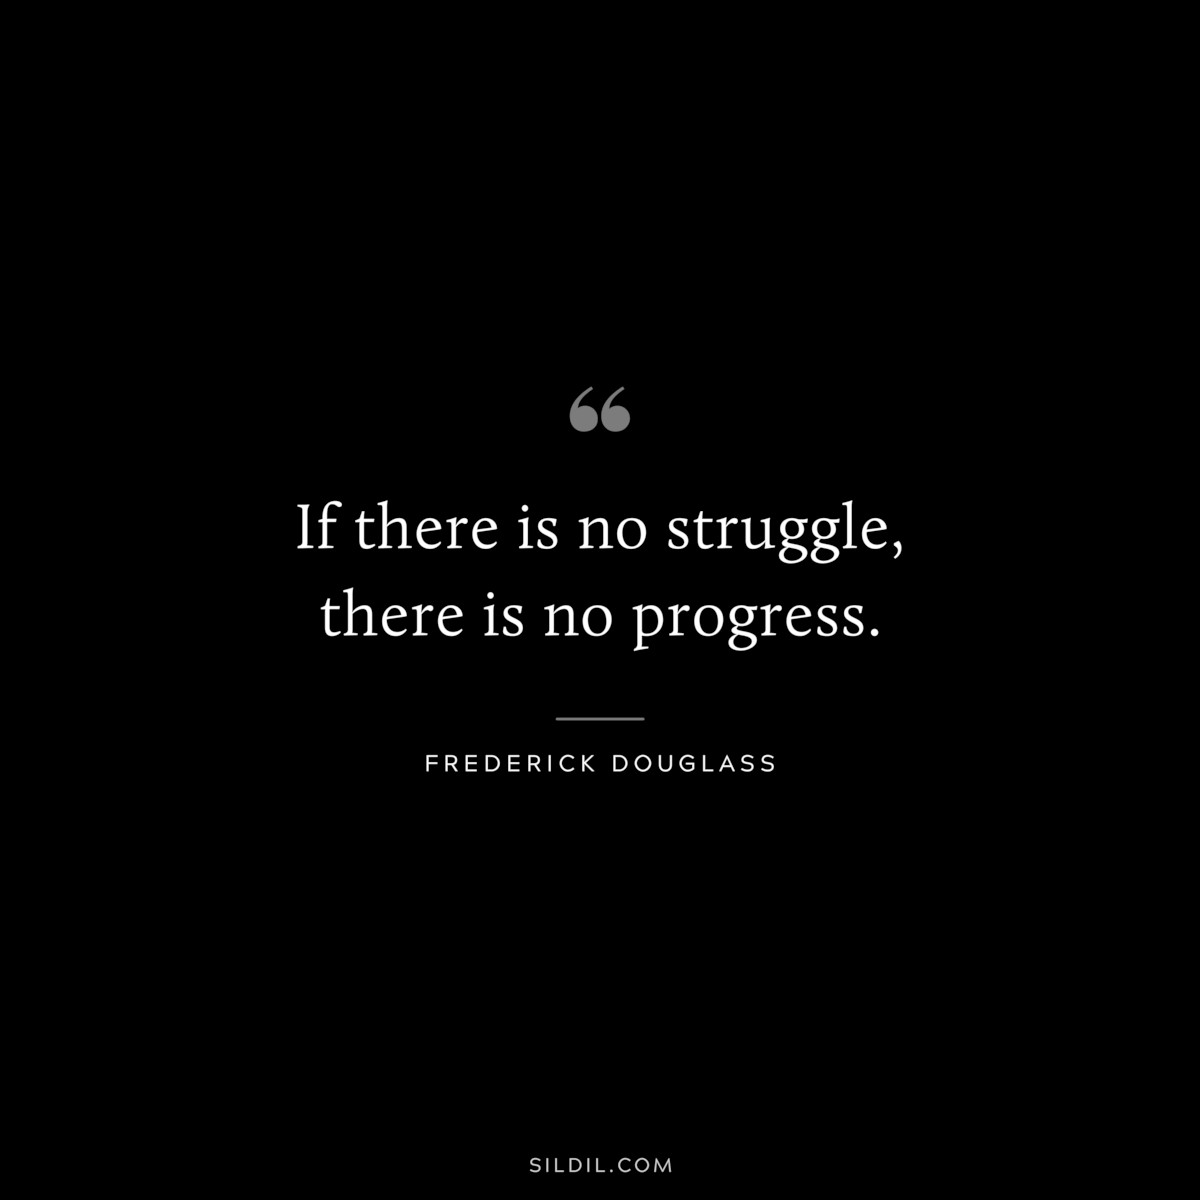 If there is no struggle, there is no progress. ― Frederick Douglass